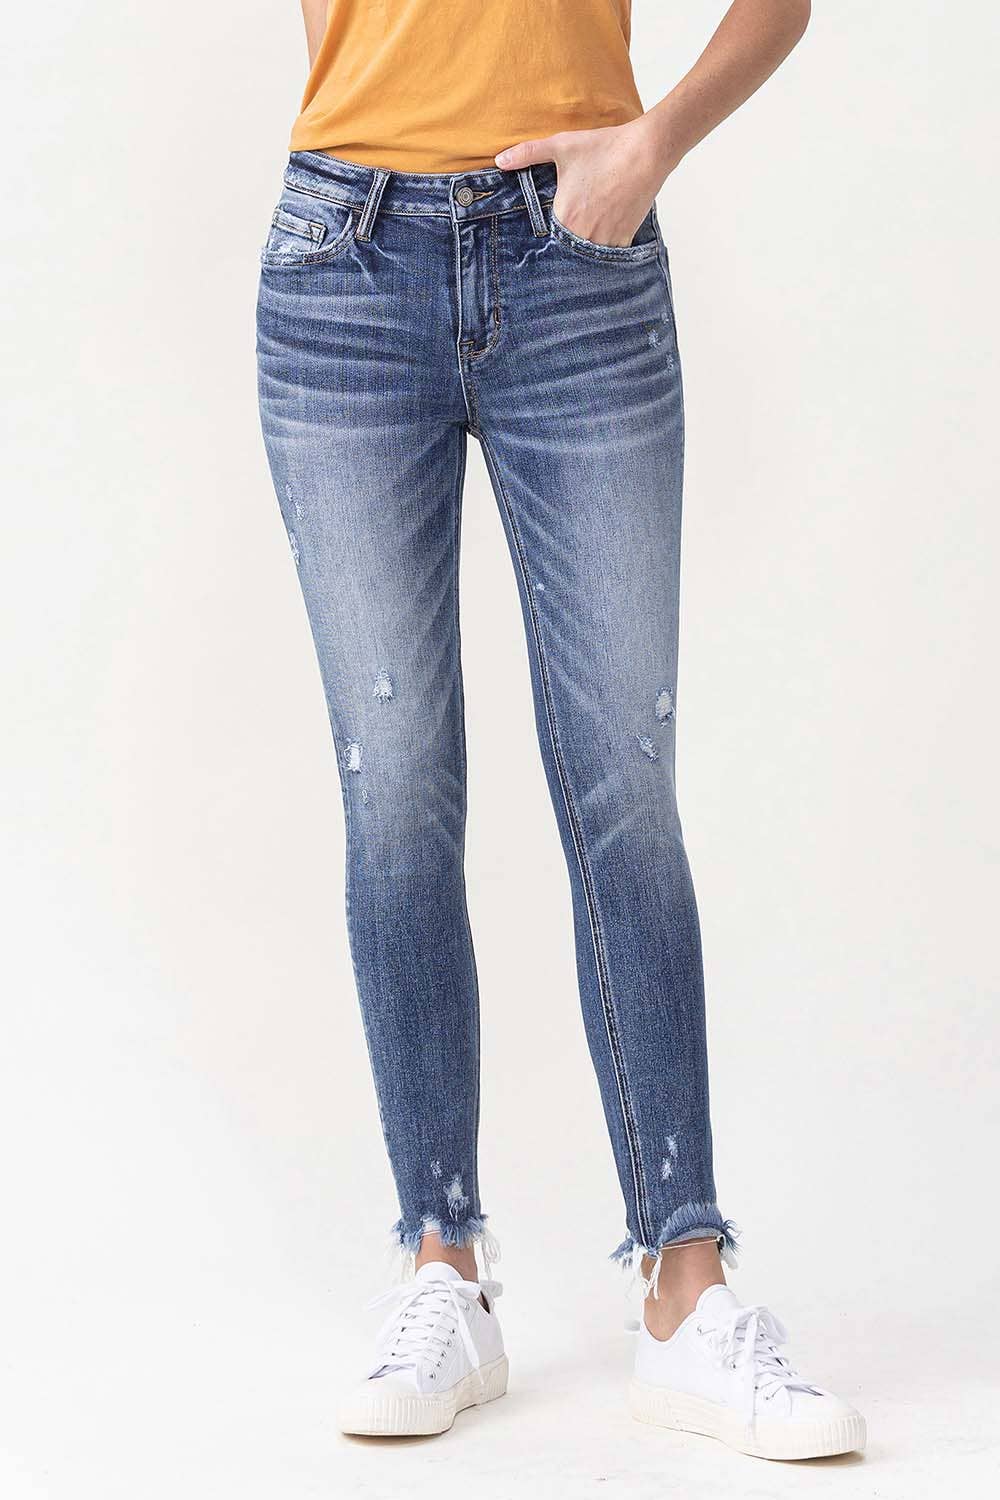 Fondly: MID RISE ANKLE SKINNY WITH FRAYED HEM